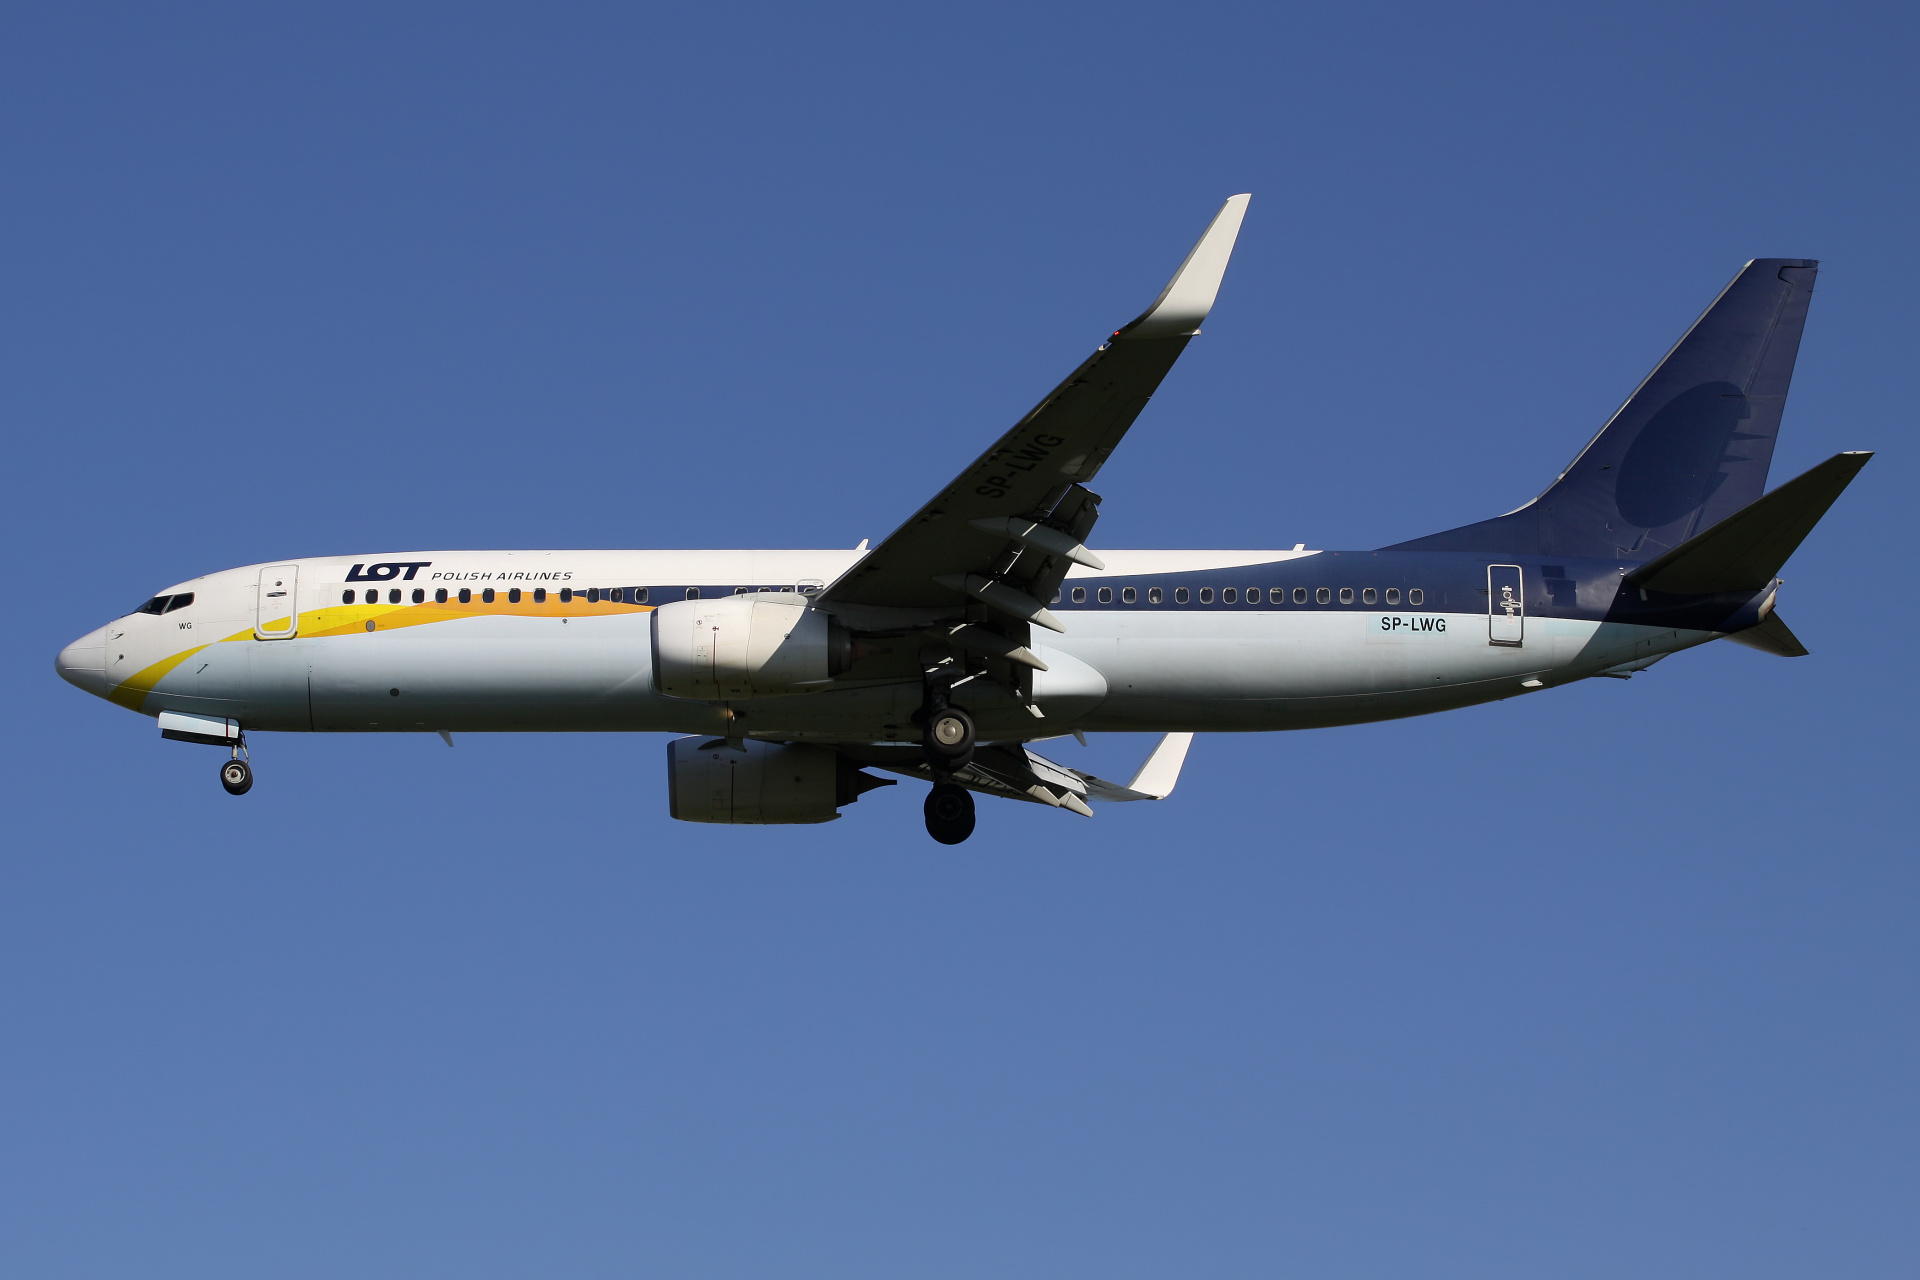 SP-LWG (Jet Airways) (Aircraft » EPWA Spotting » Boeing 737-800 » LOT Polish Airlines)